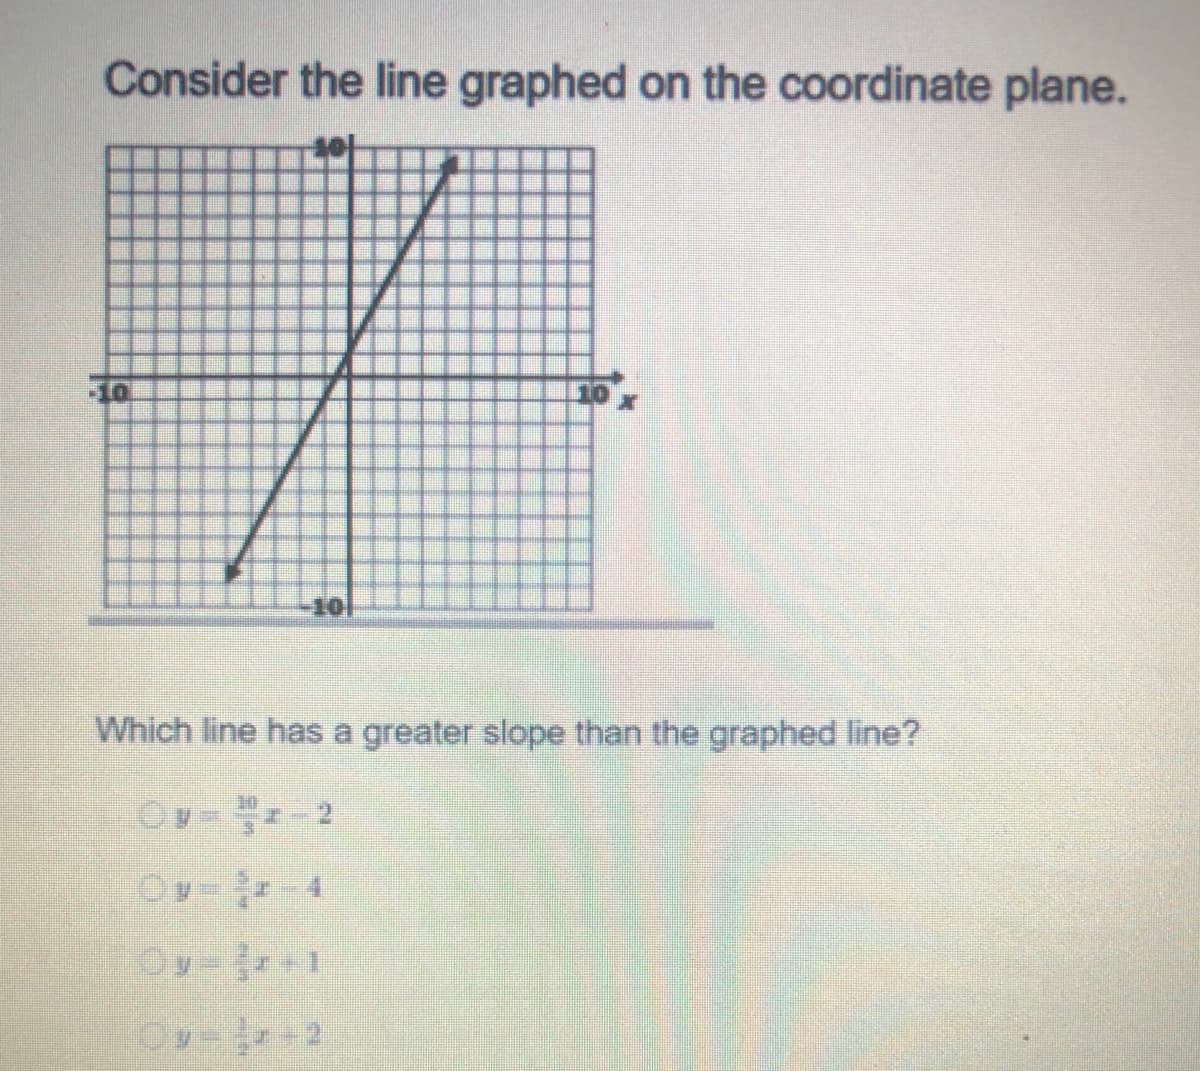 Consider the line graphed on the coordinate plane.
10
Which line has a greater slope than the graphed line?
Ov- - 2
